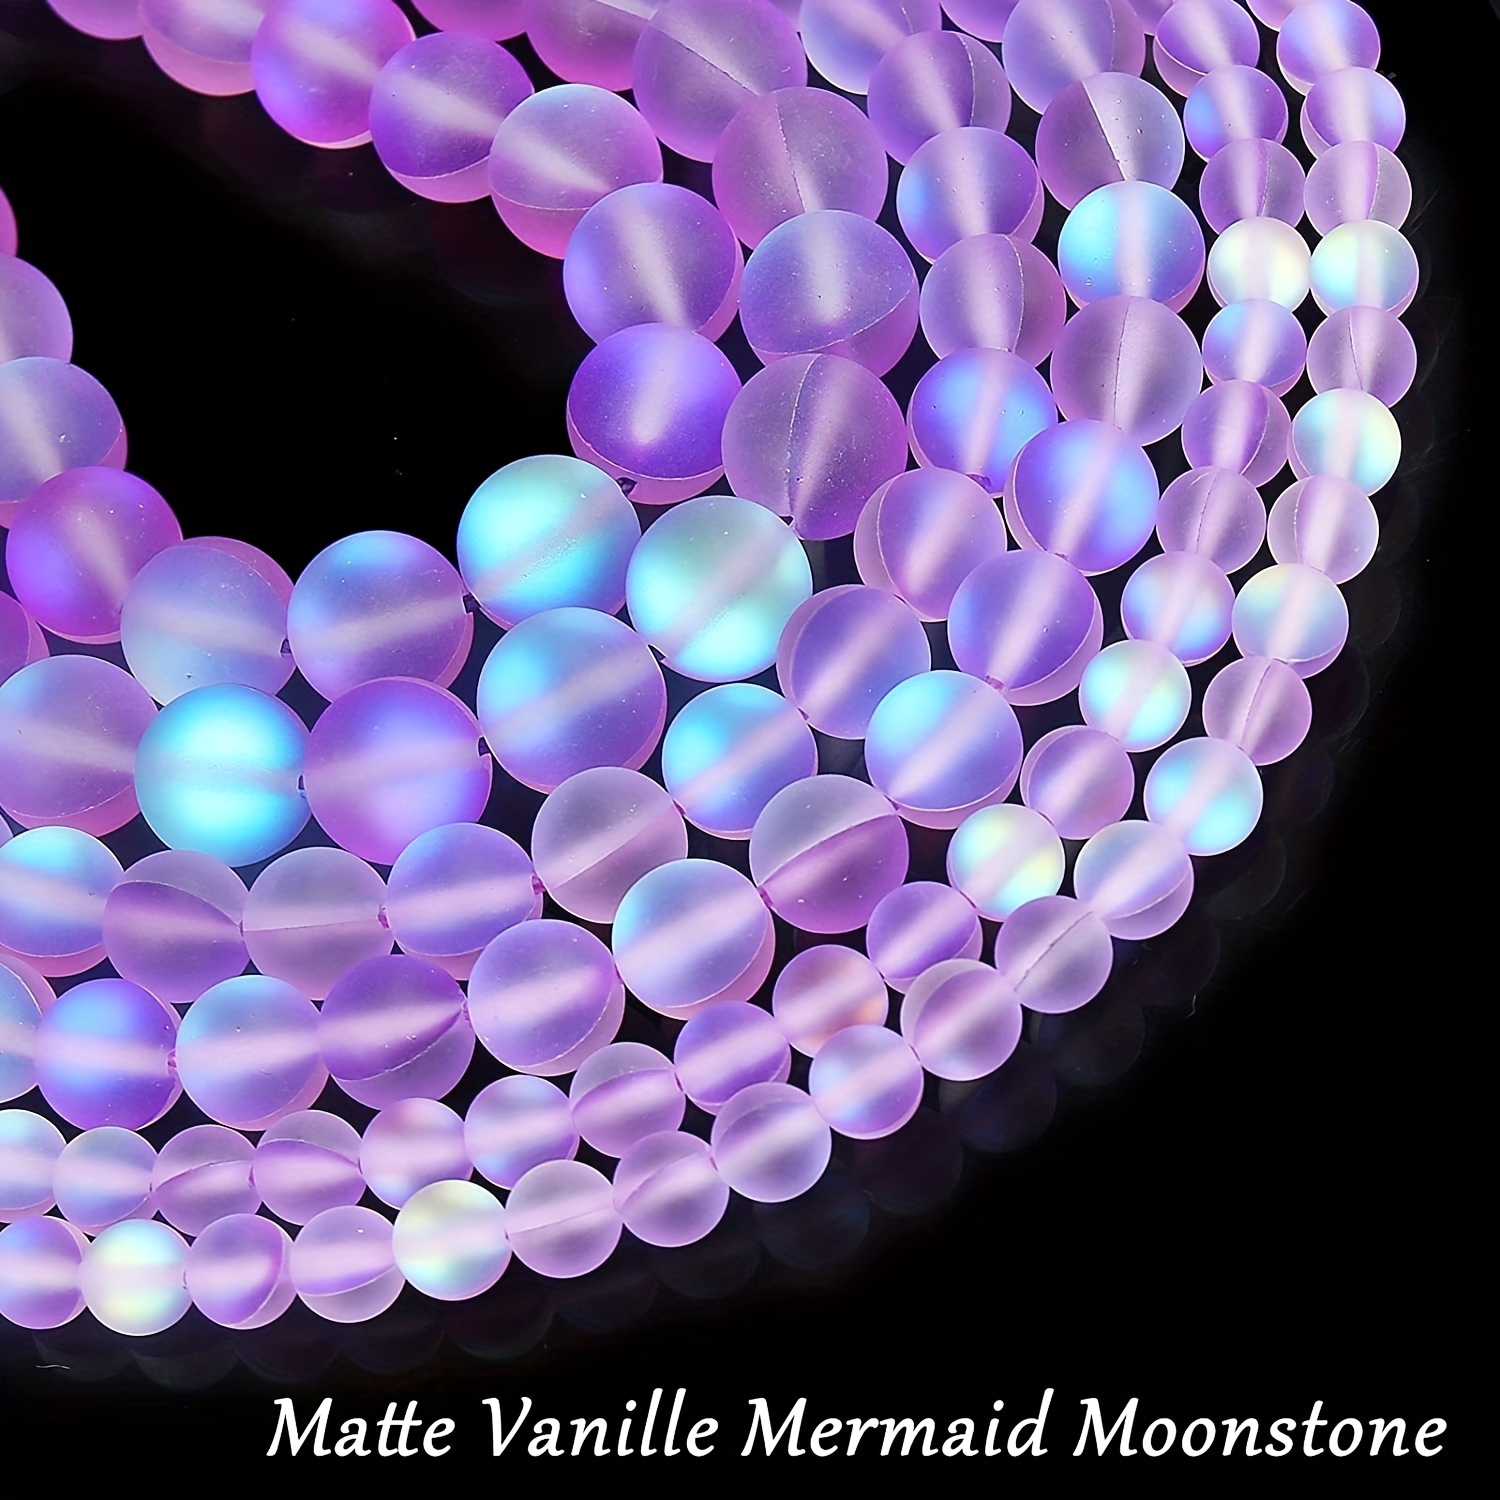 

Matte Aurora Amethyst Bead Synthetic Crystal, 60 Pcs (6mm) 45 Pcs (8mm) Flash Flash Mermaid Round Loose Beads For Jewelry Making